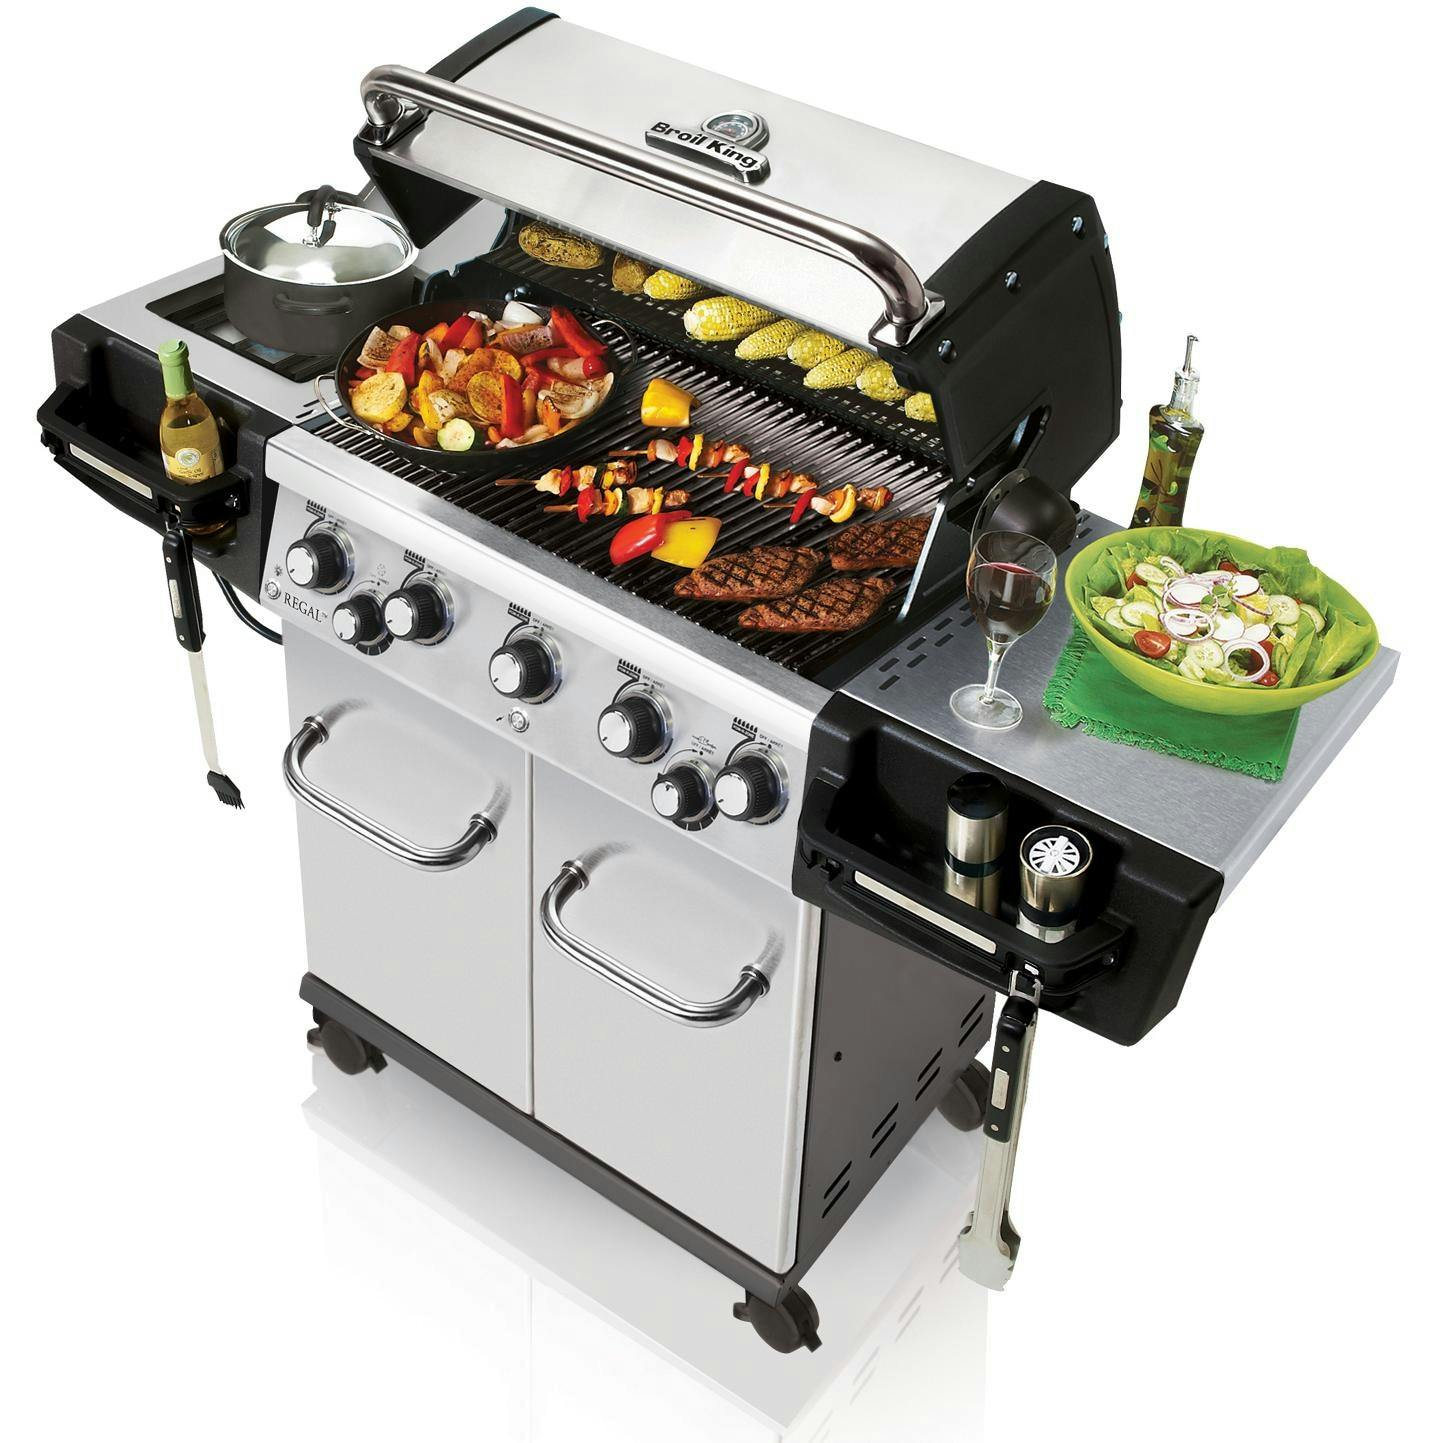 Broil King Regal Pro S590 Gas Grill with Rotisserie and Side Burner · Natural Gas